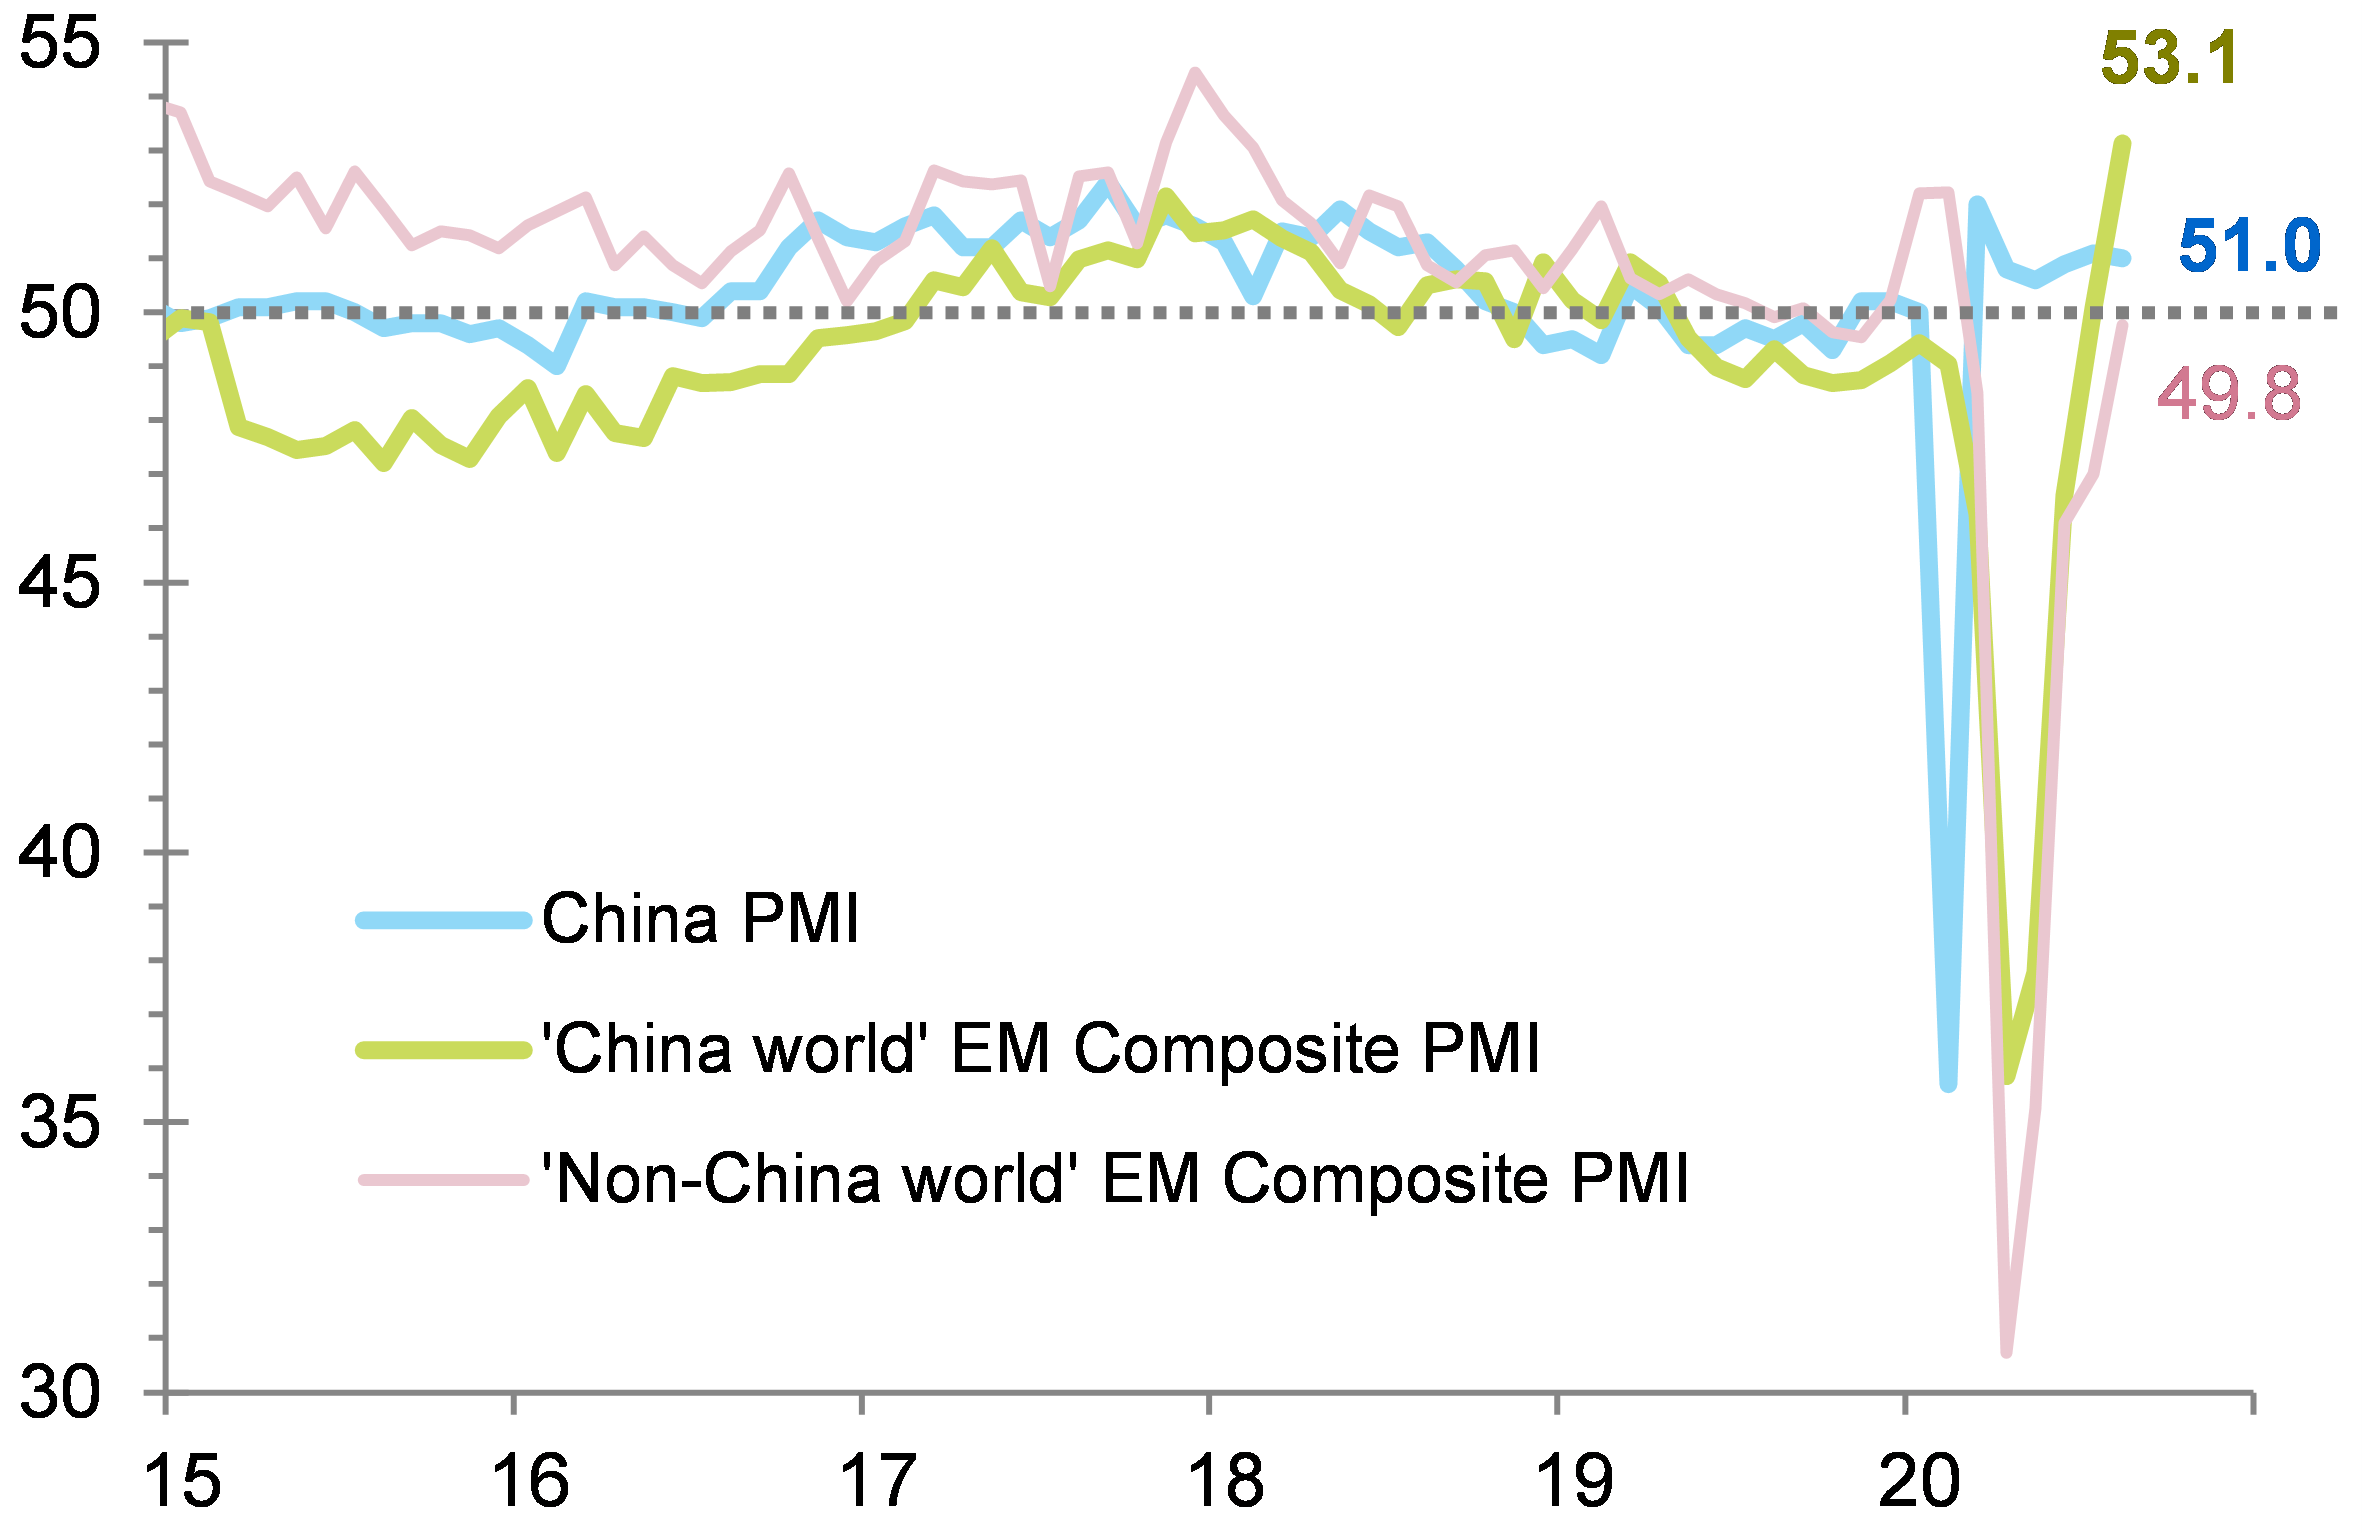 Figure 15 - Composite Manufacturing PMIs of ‘China-dependent’ (incl. Taiwan, Hong Kong, Singapore, Indonesia, South Korea, Brazil, Russia, South Africa) and ‘non-China-dependent’ EMs vs. China’s PMI